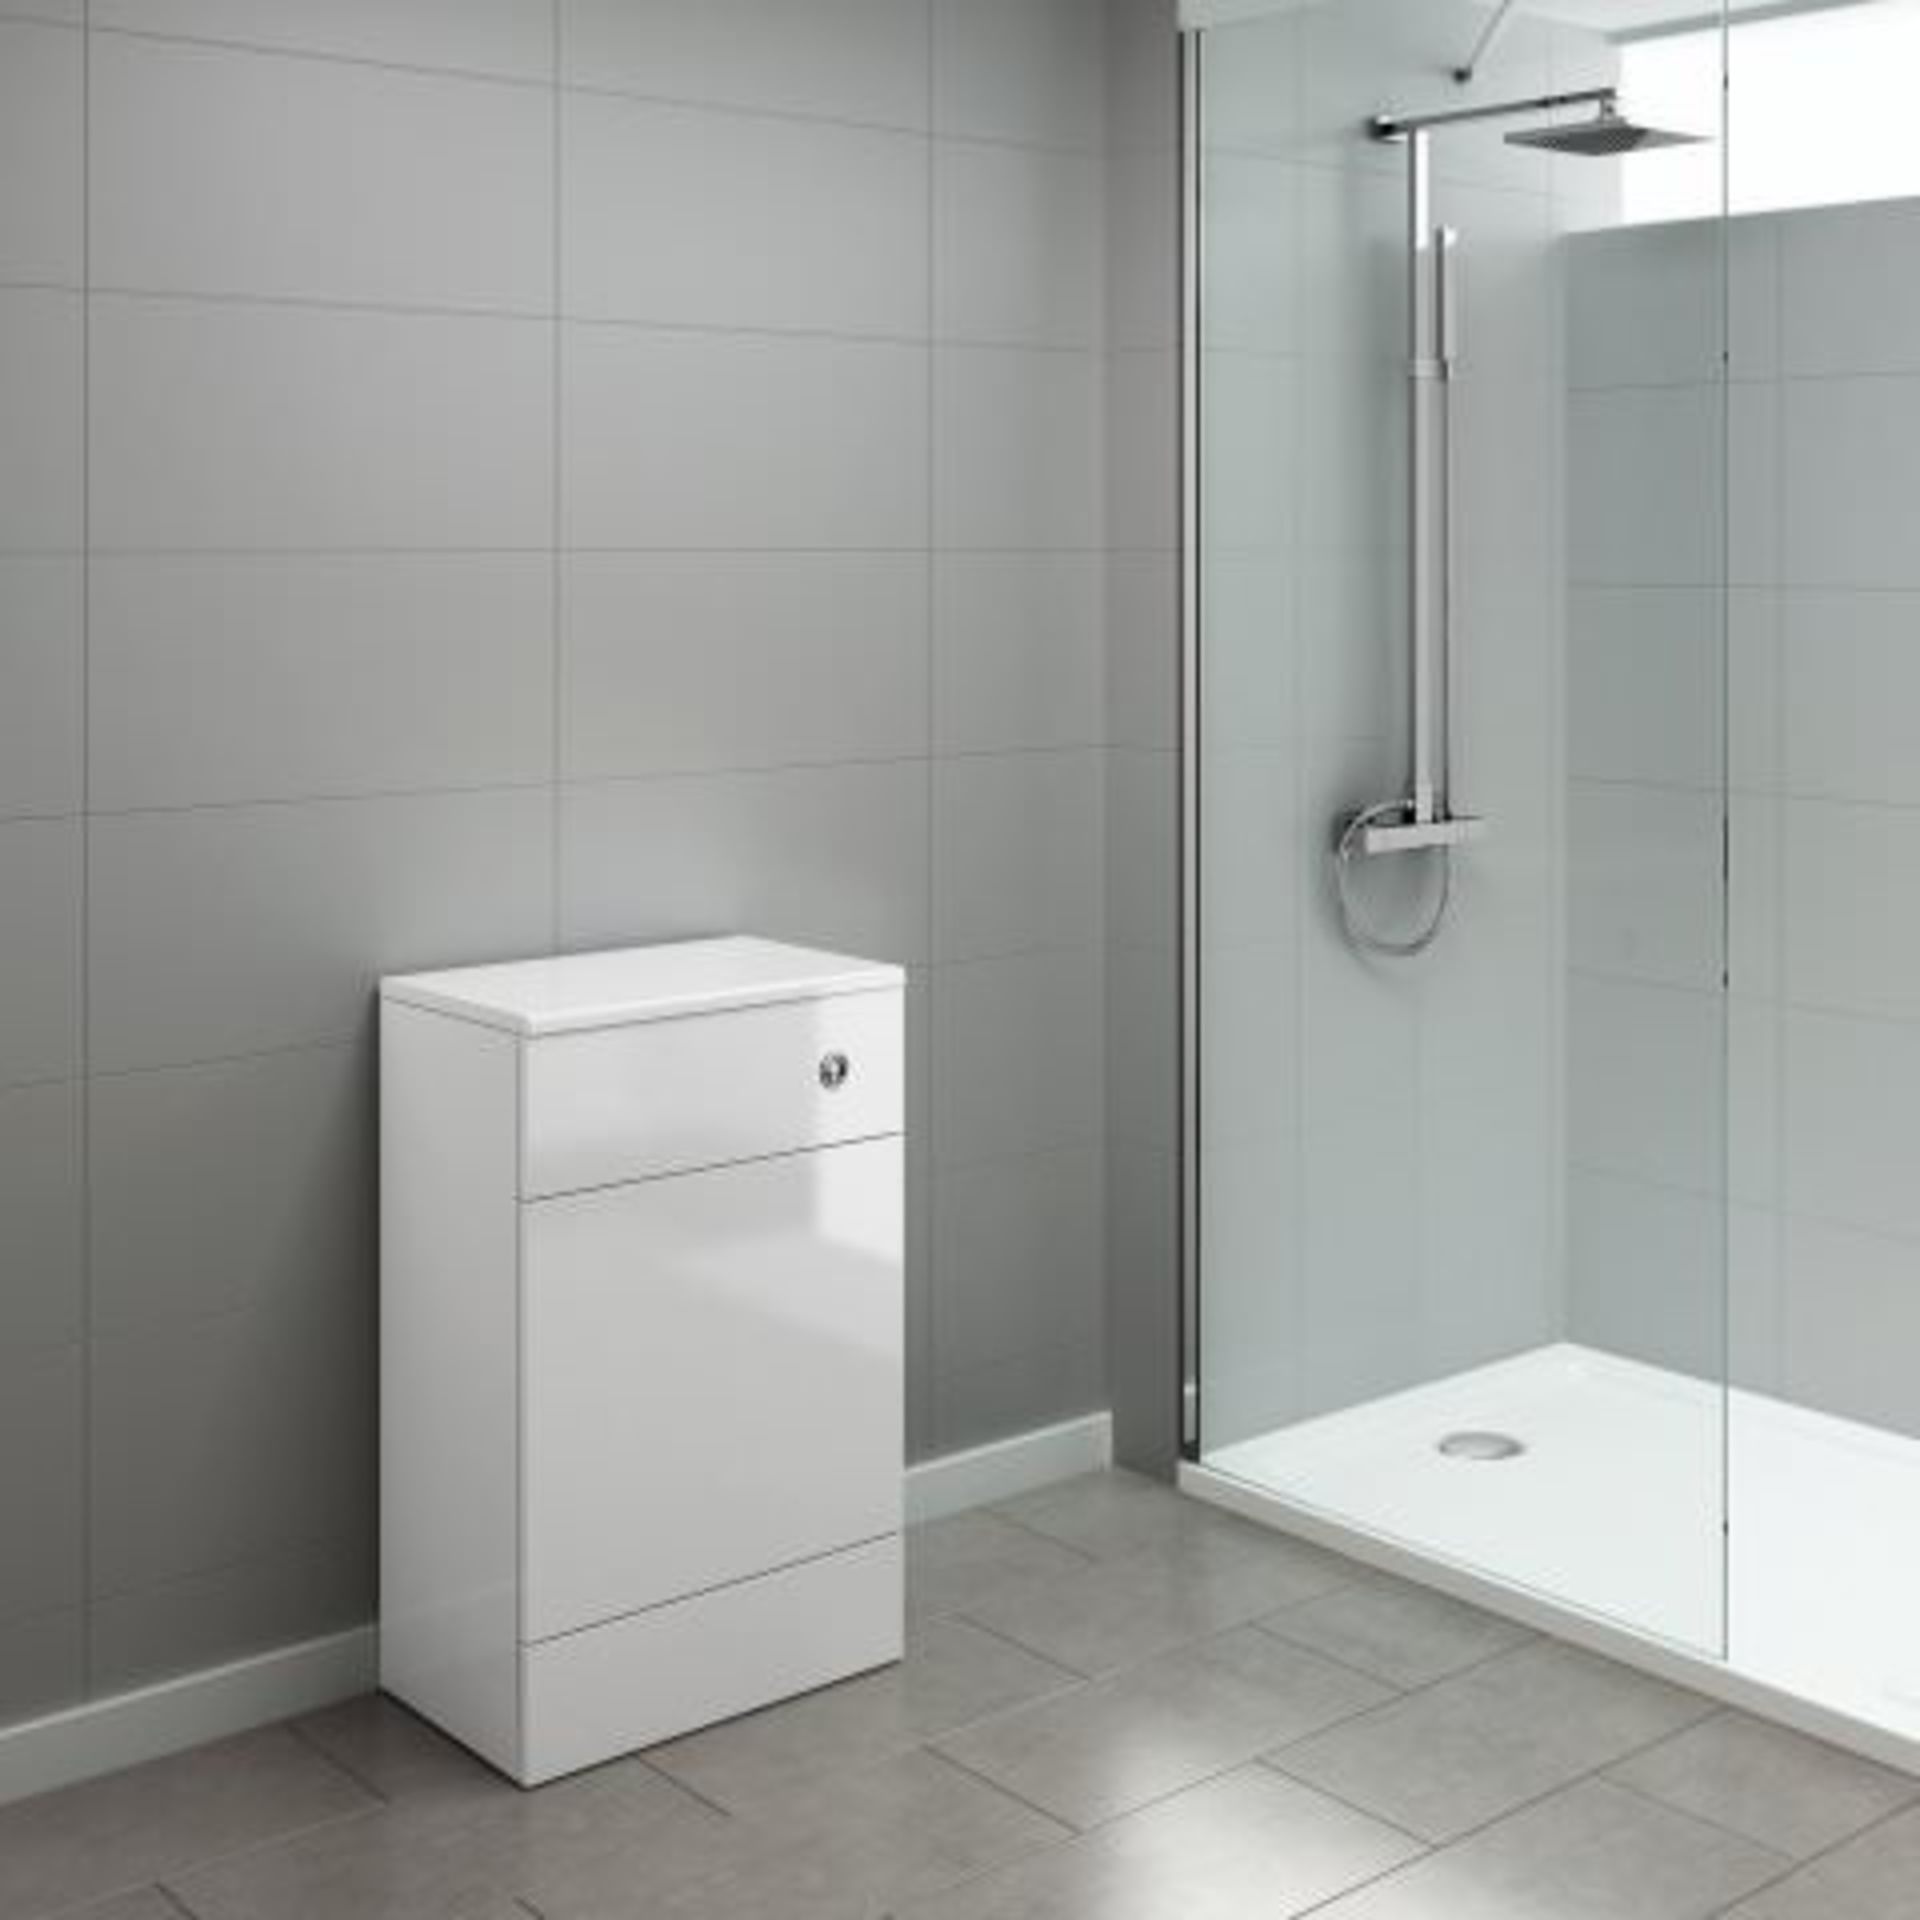 (AA18) 500mm Harper Gloss White Back To Wall Toilet Unit. RRP £174.99. This practical Harper Gloss - Image 3 of 4